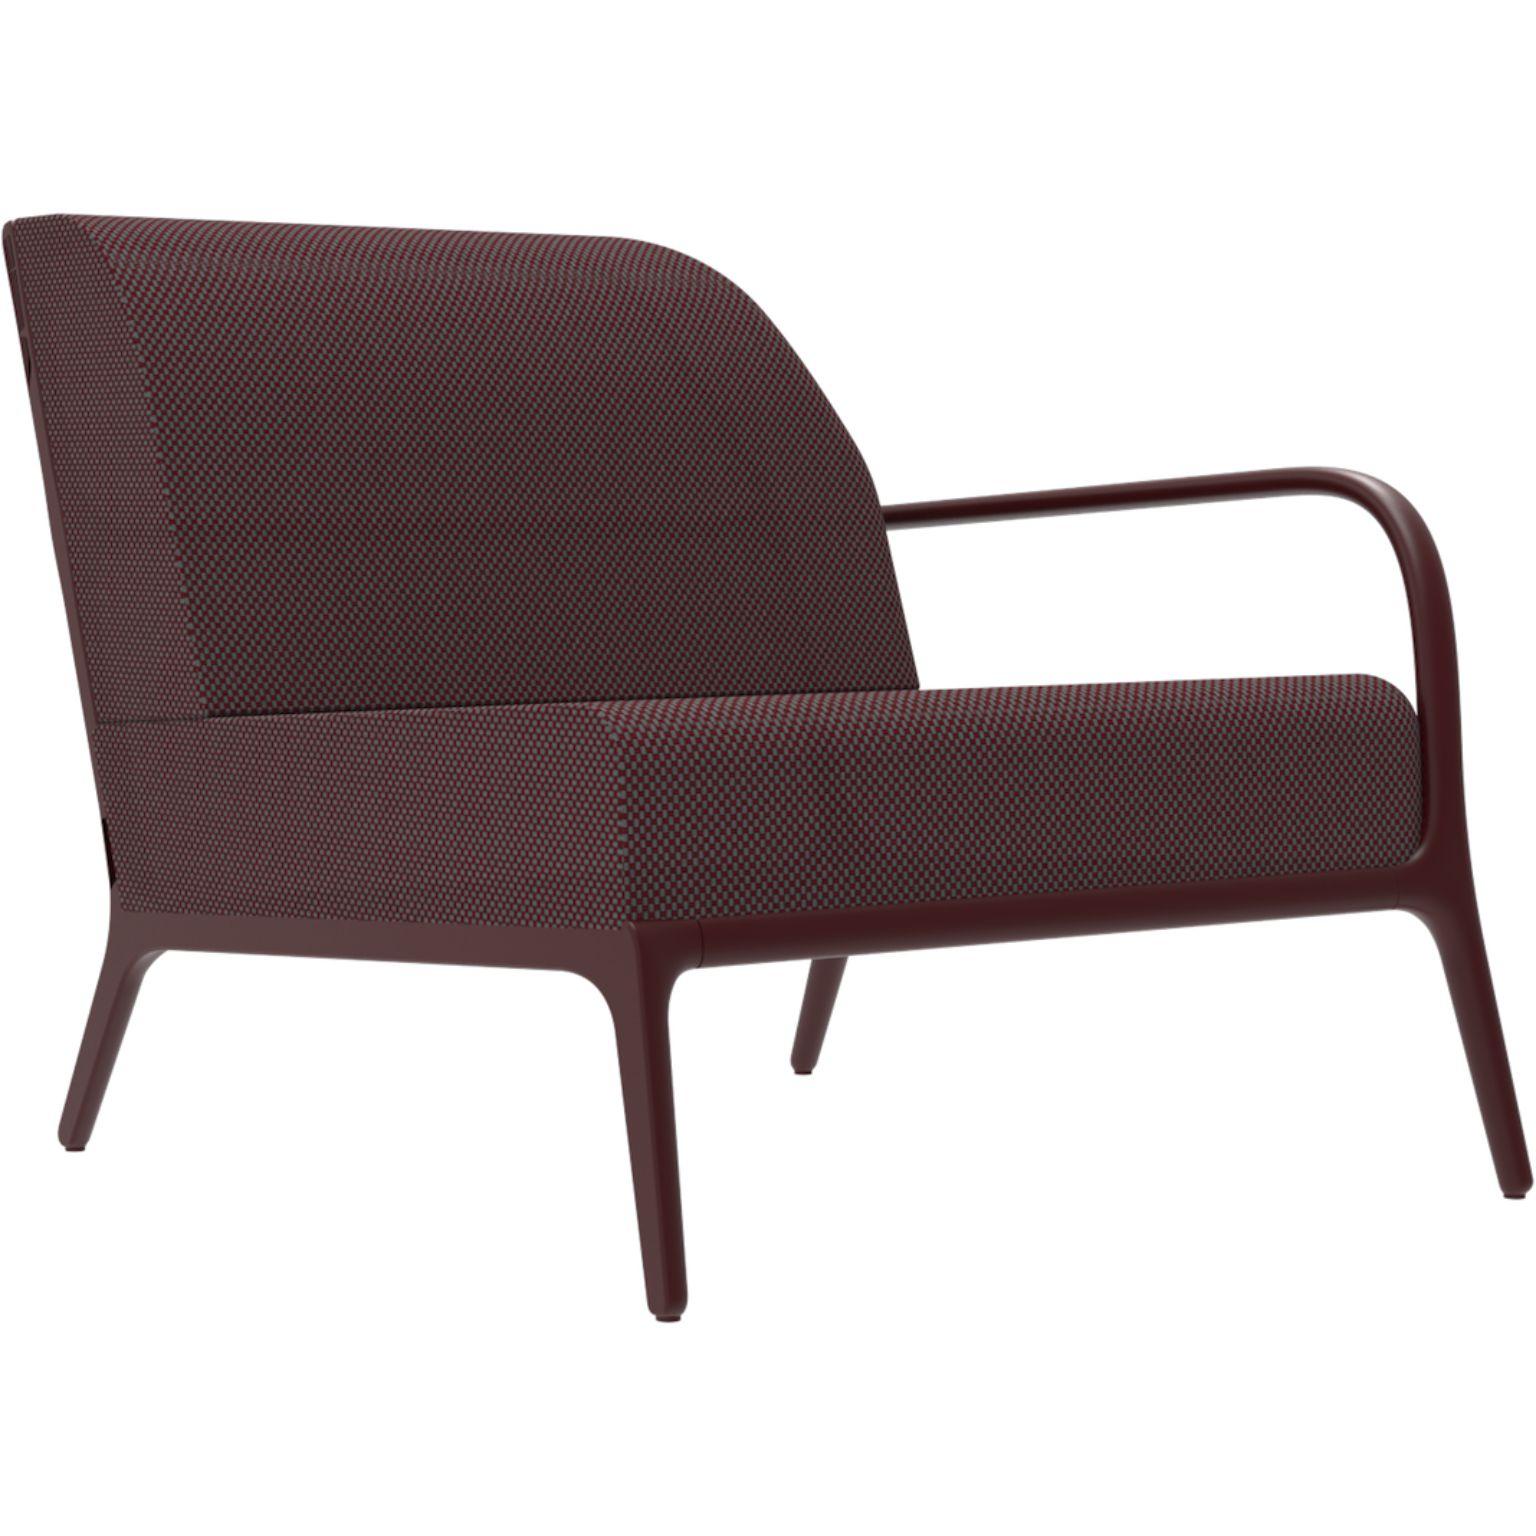 Xaloc left 90 burgundy modular sofa by MOWEE
Dimensions: D100 x W90 x H81 cm (Seat Height 42 cm)
Material: Aluminium, Textile
Weight: 25 kg
Also Available in different colours and finishes. 

 Xaloc synthesizes the lines of interior furniture